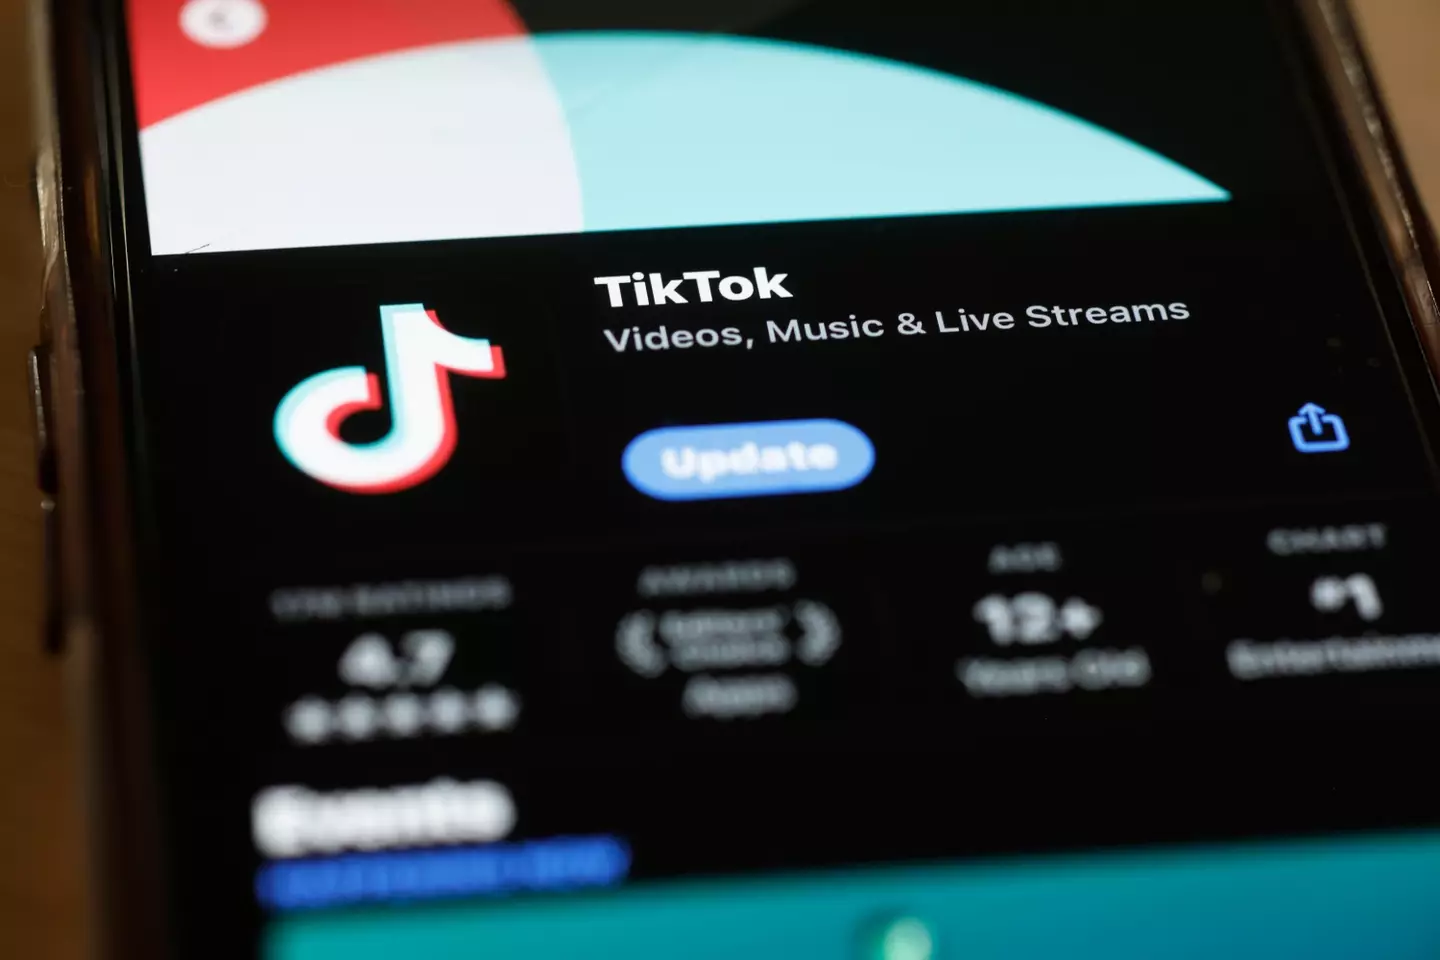 The bill could see TikTok banned from app stores in the US.